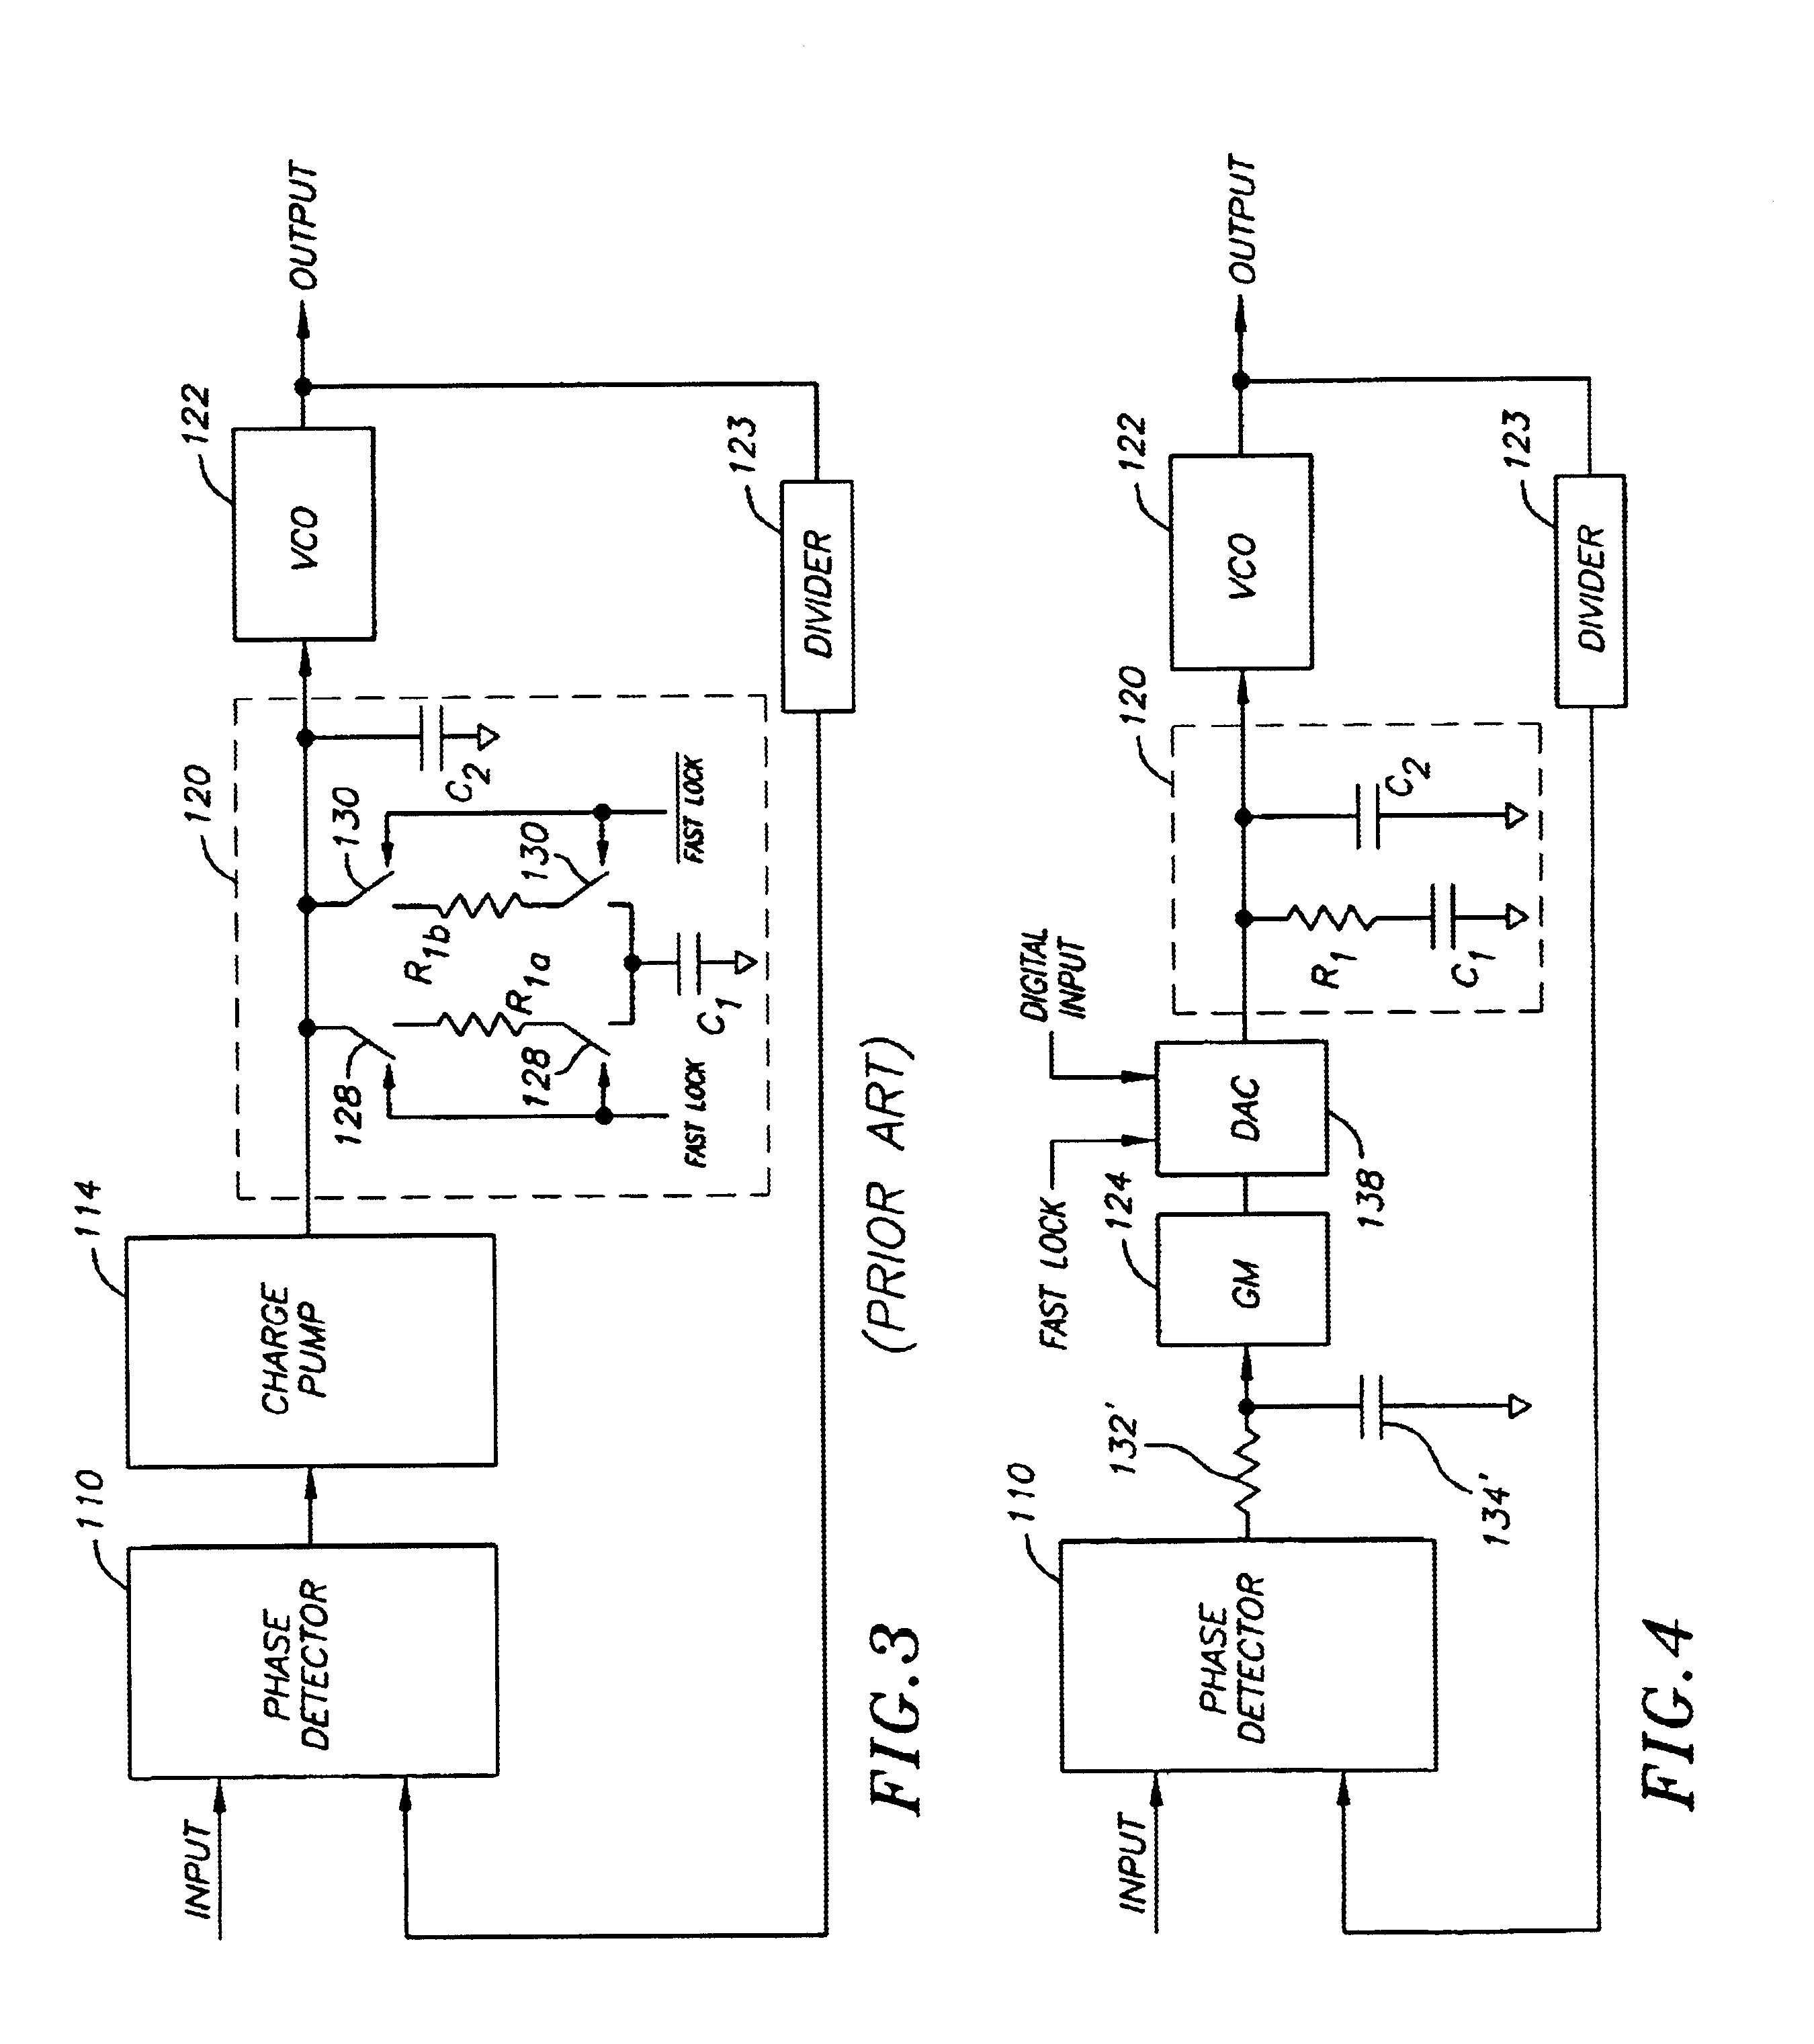 Fast acquisition phase locked loop using a current DAC